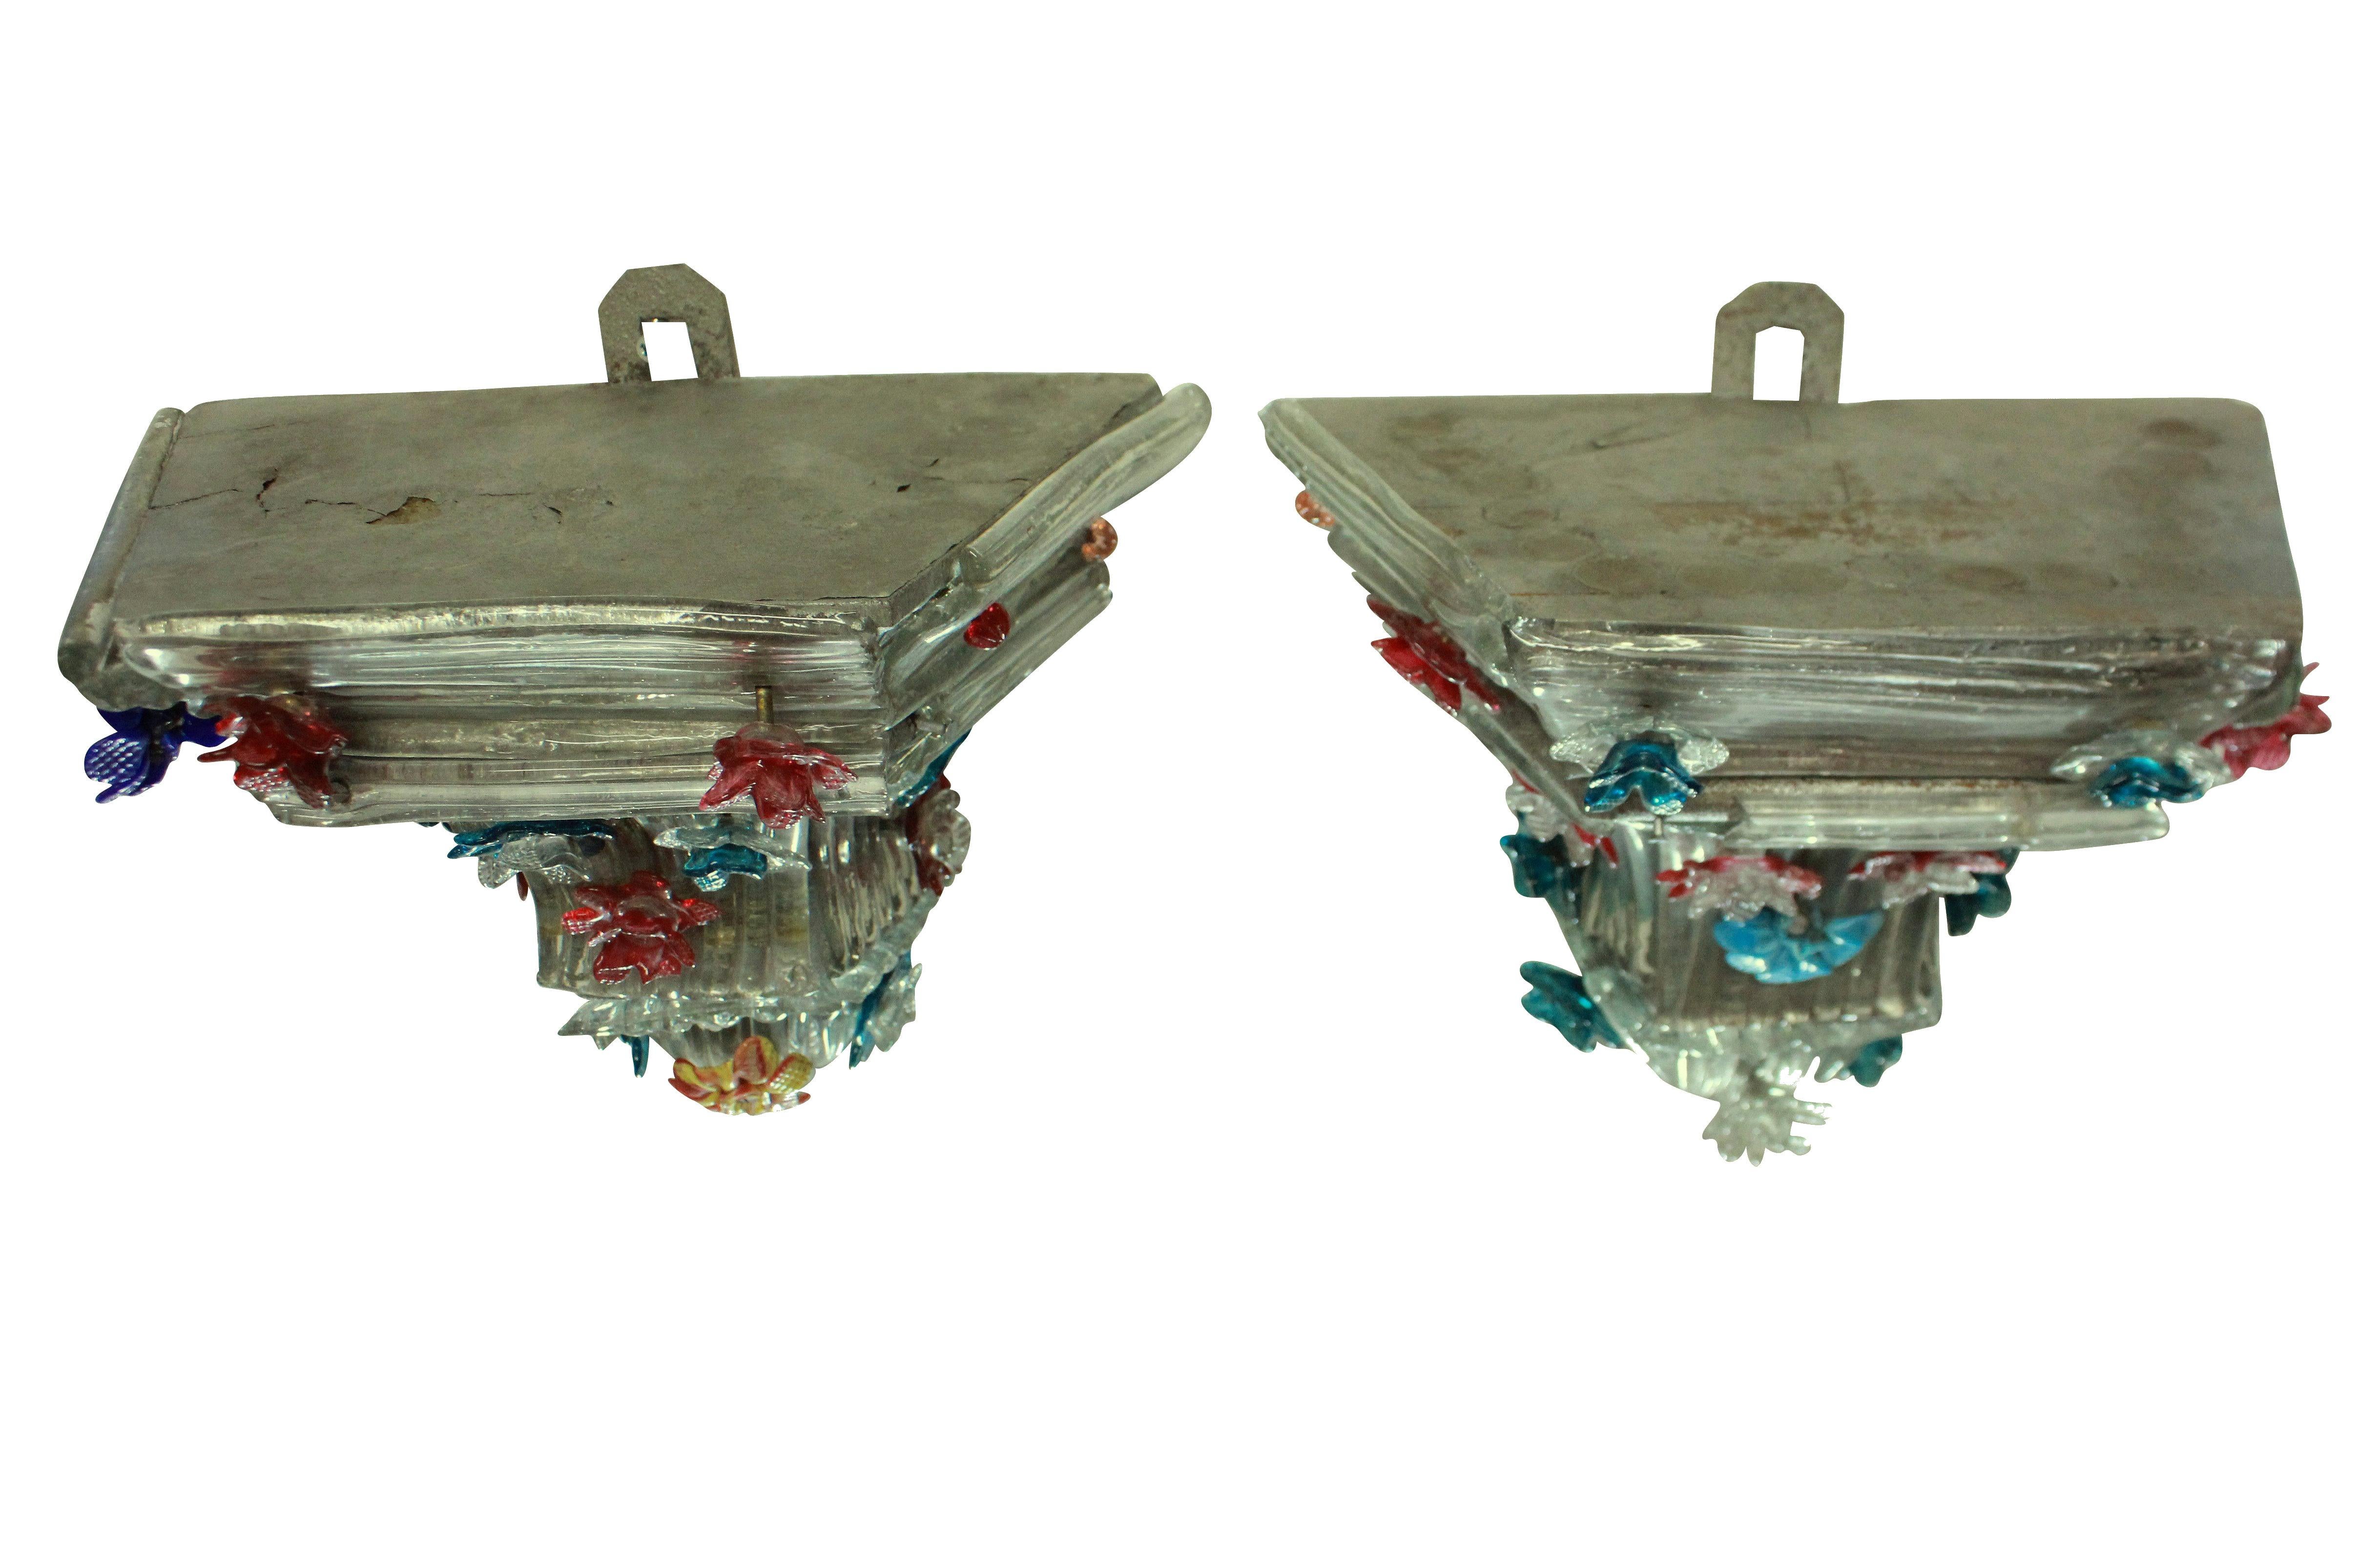 A pair of charming Italian Murano glass wall brackets with colored flowers. Some losses.